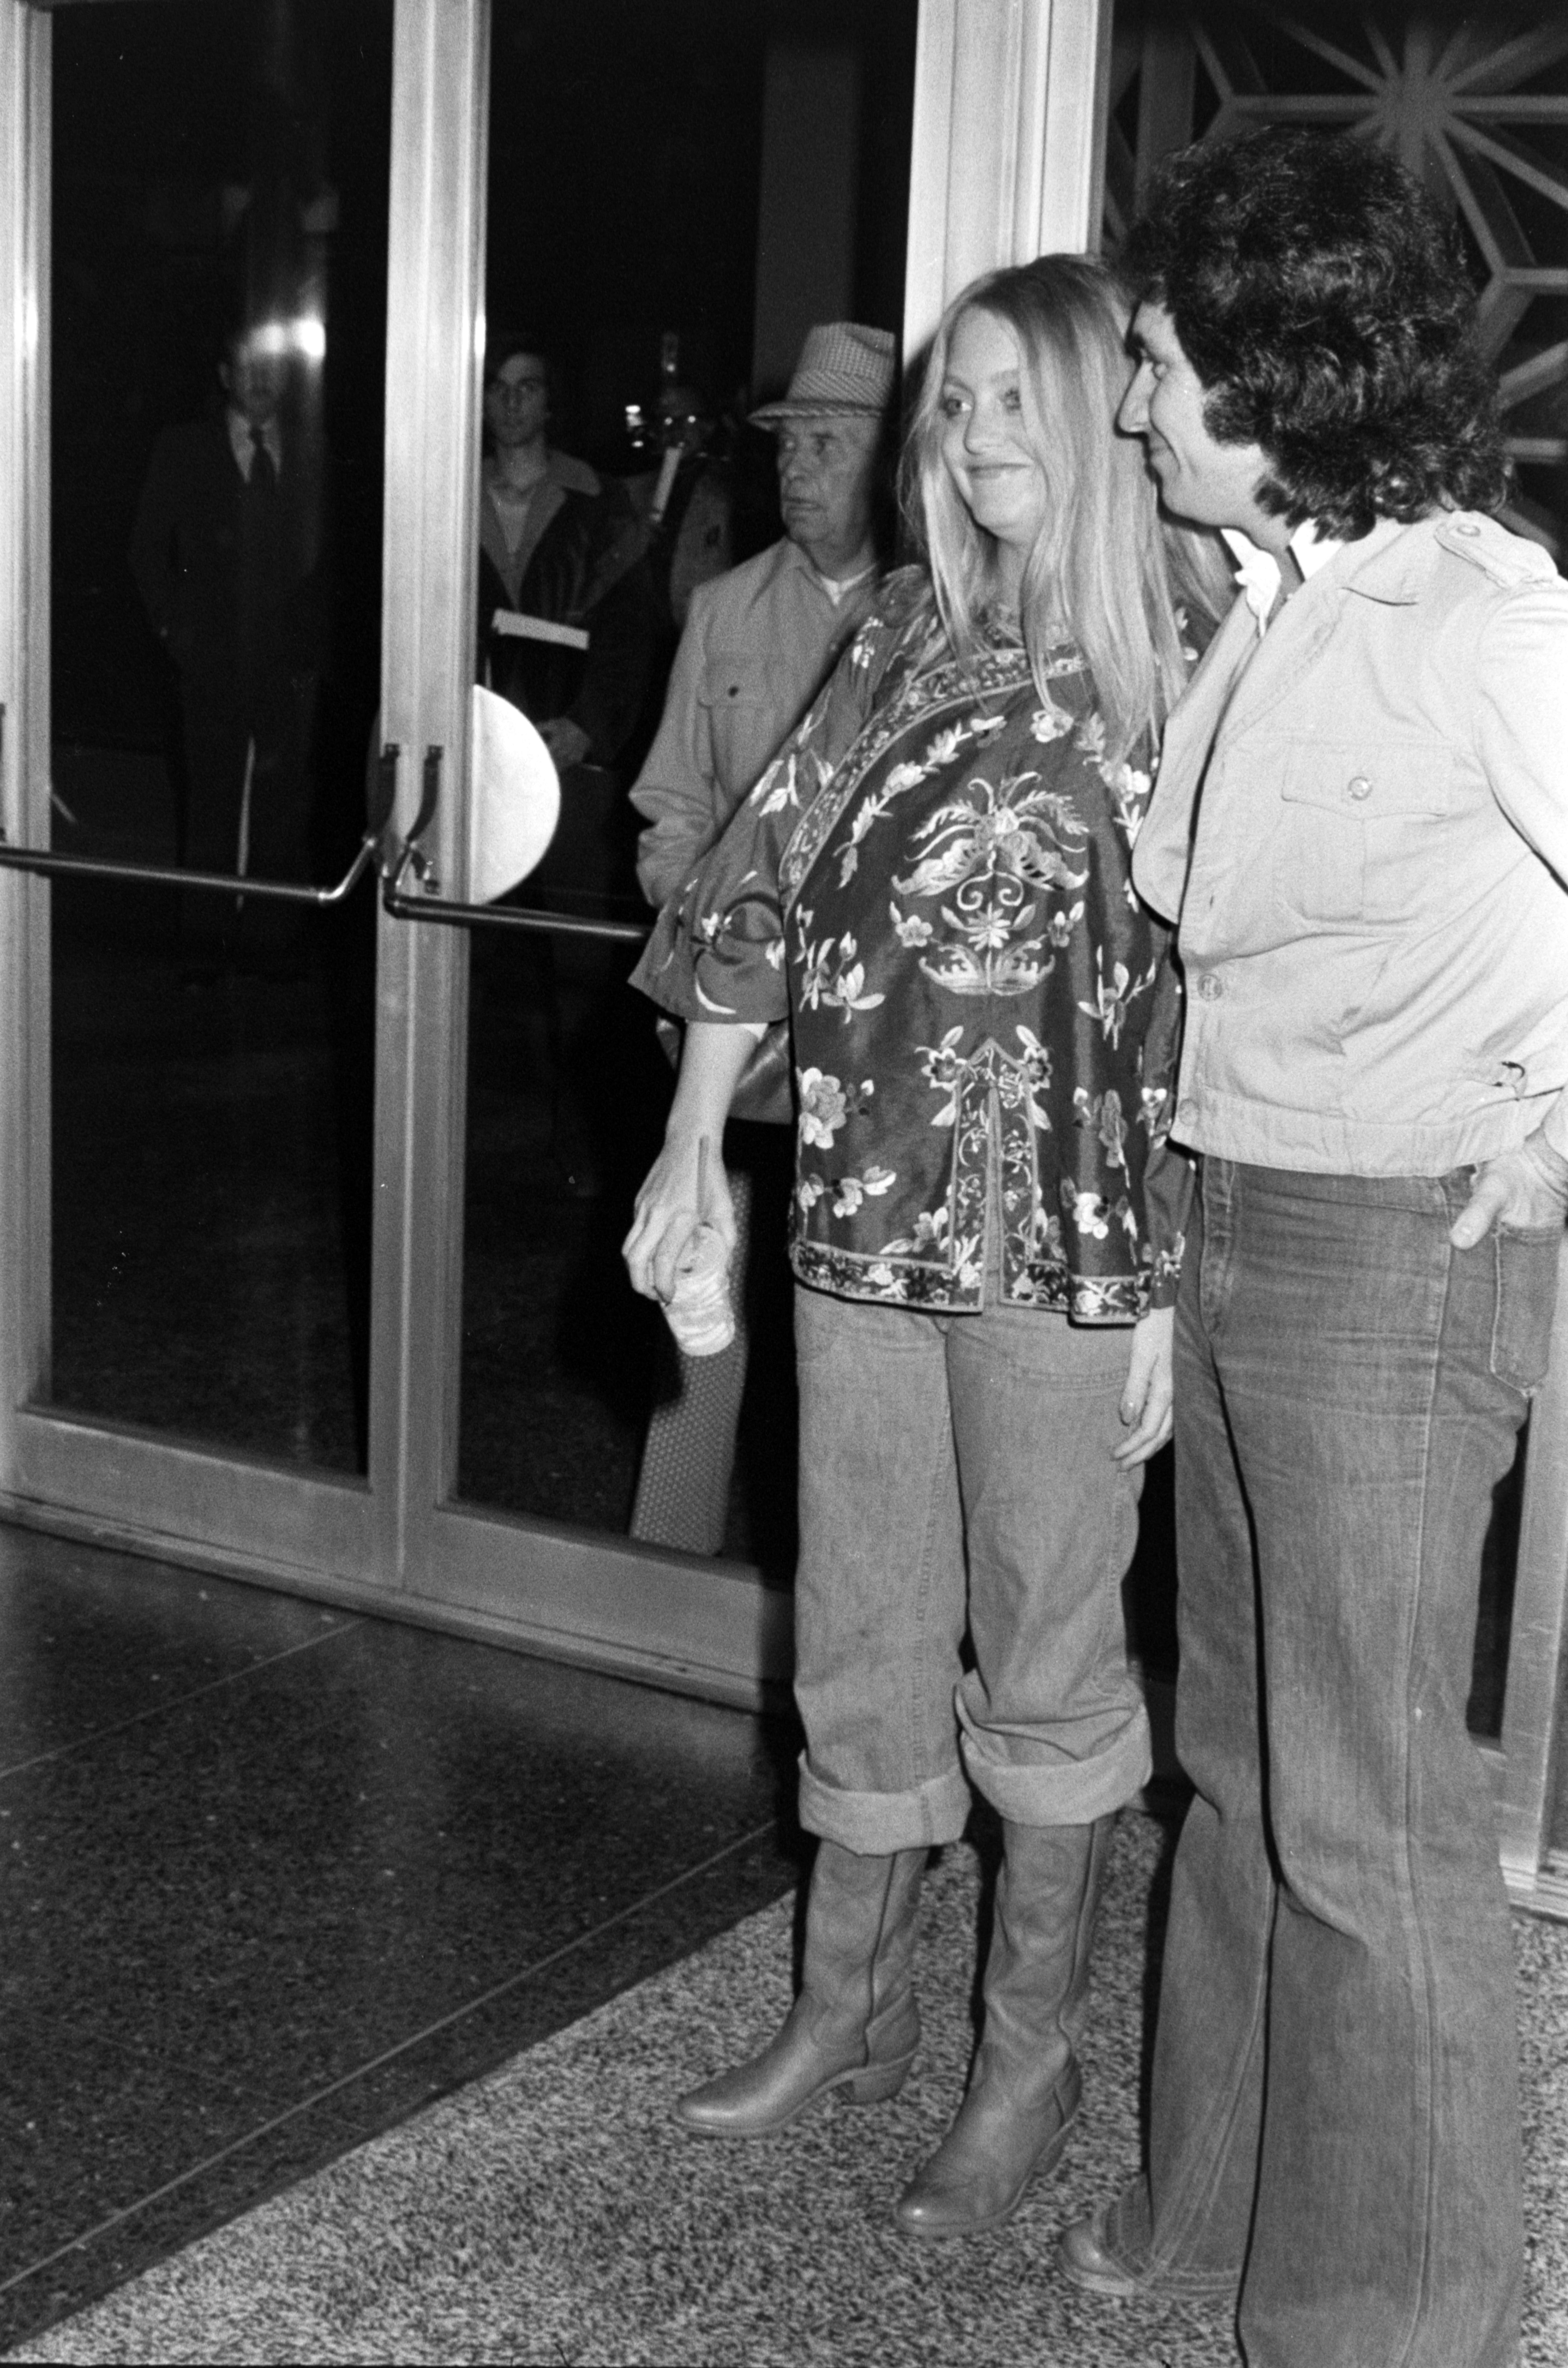 Goldie Hawn (2nd from L), pregnant with son Oliver Hudson, and Bill Hudson (R) attend an advance screening of "Taxi Driver" at the headquarters of the Directors Guild of America in Hollywood, California, on February 19, 1976. | Source: Getty Images